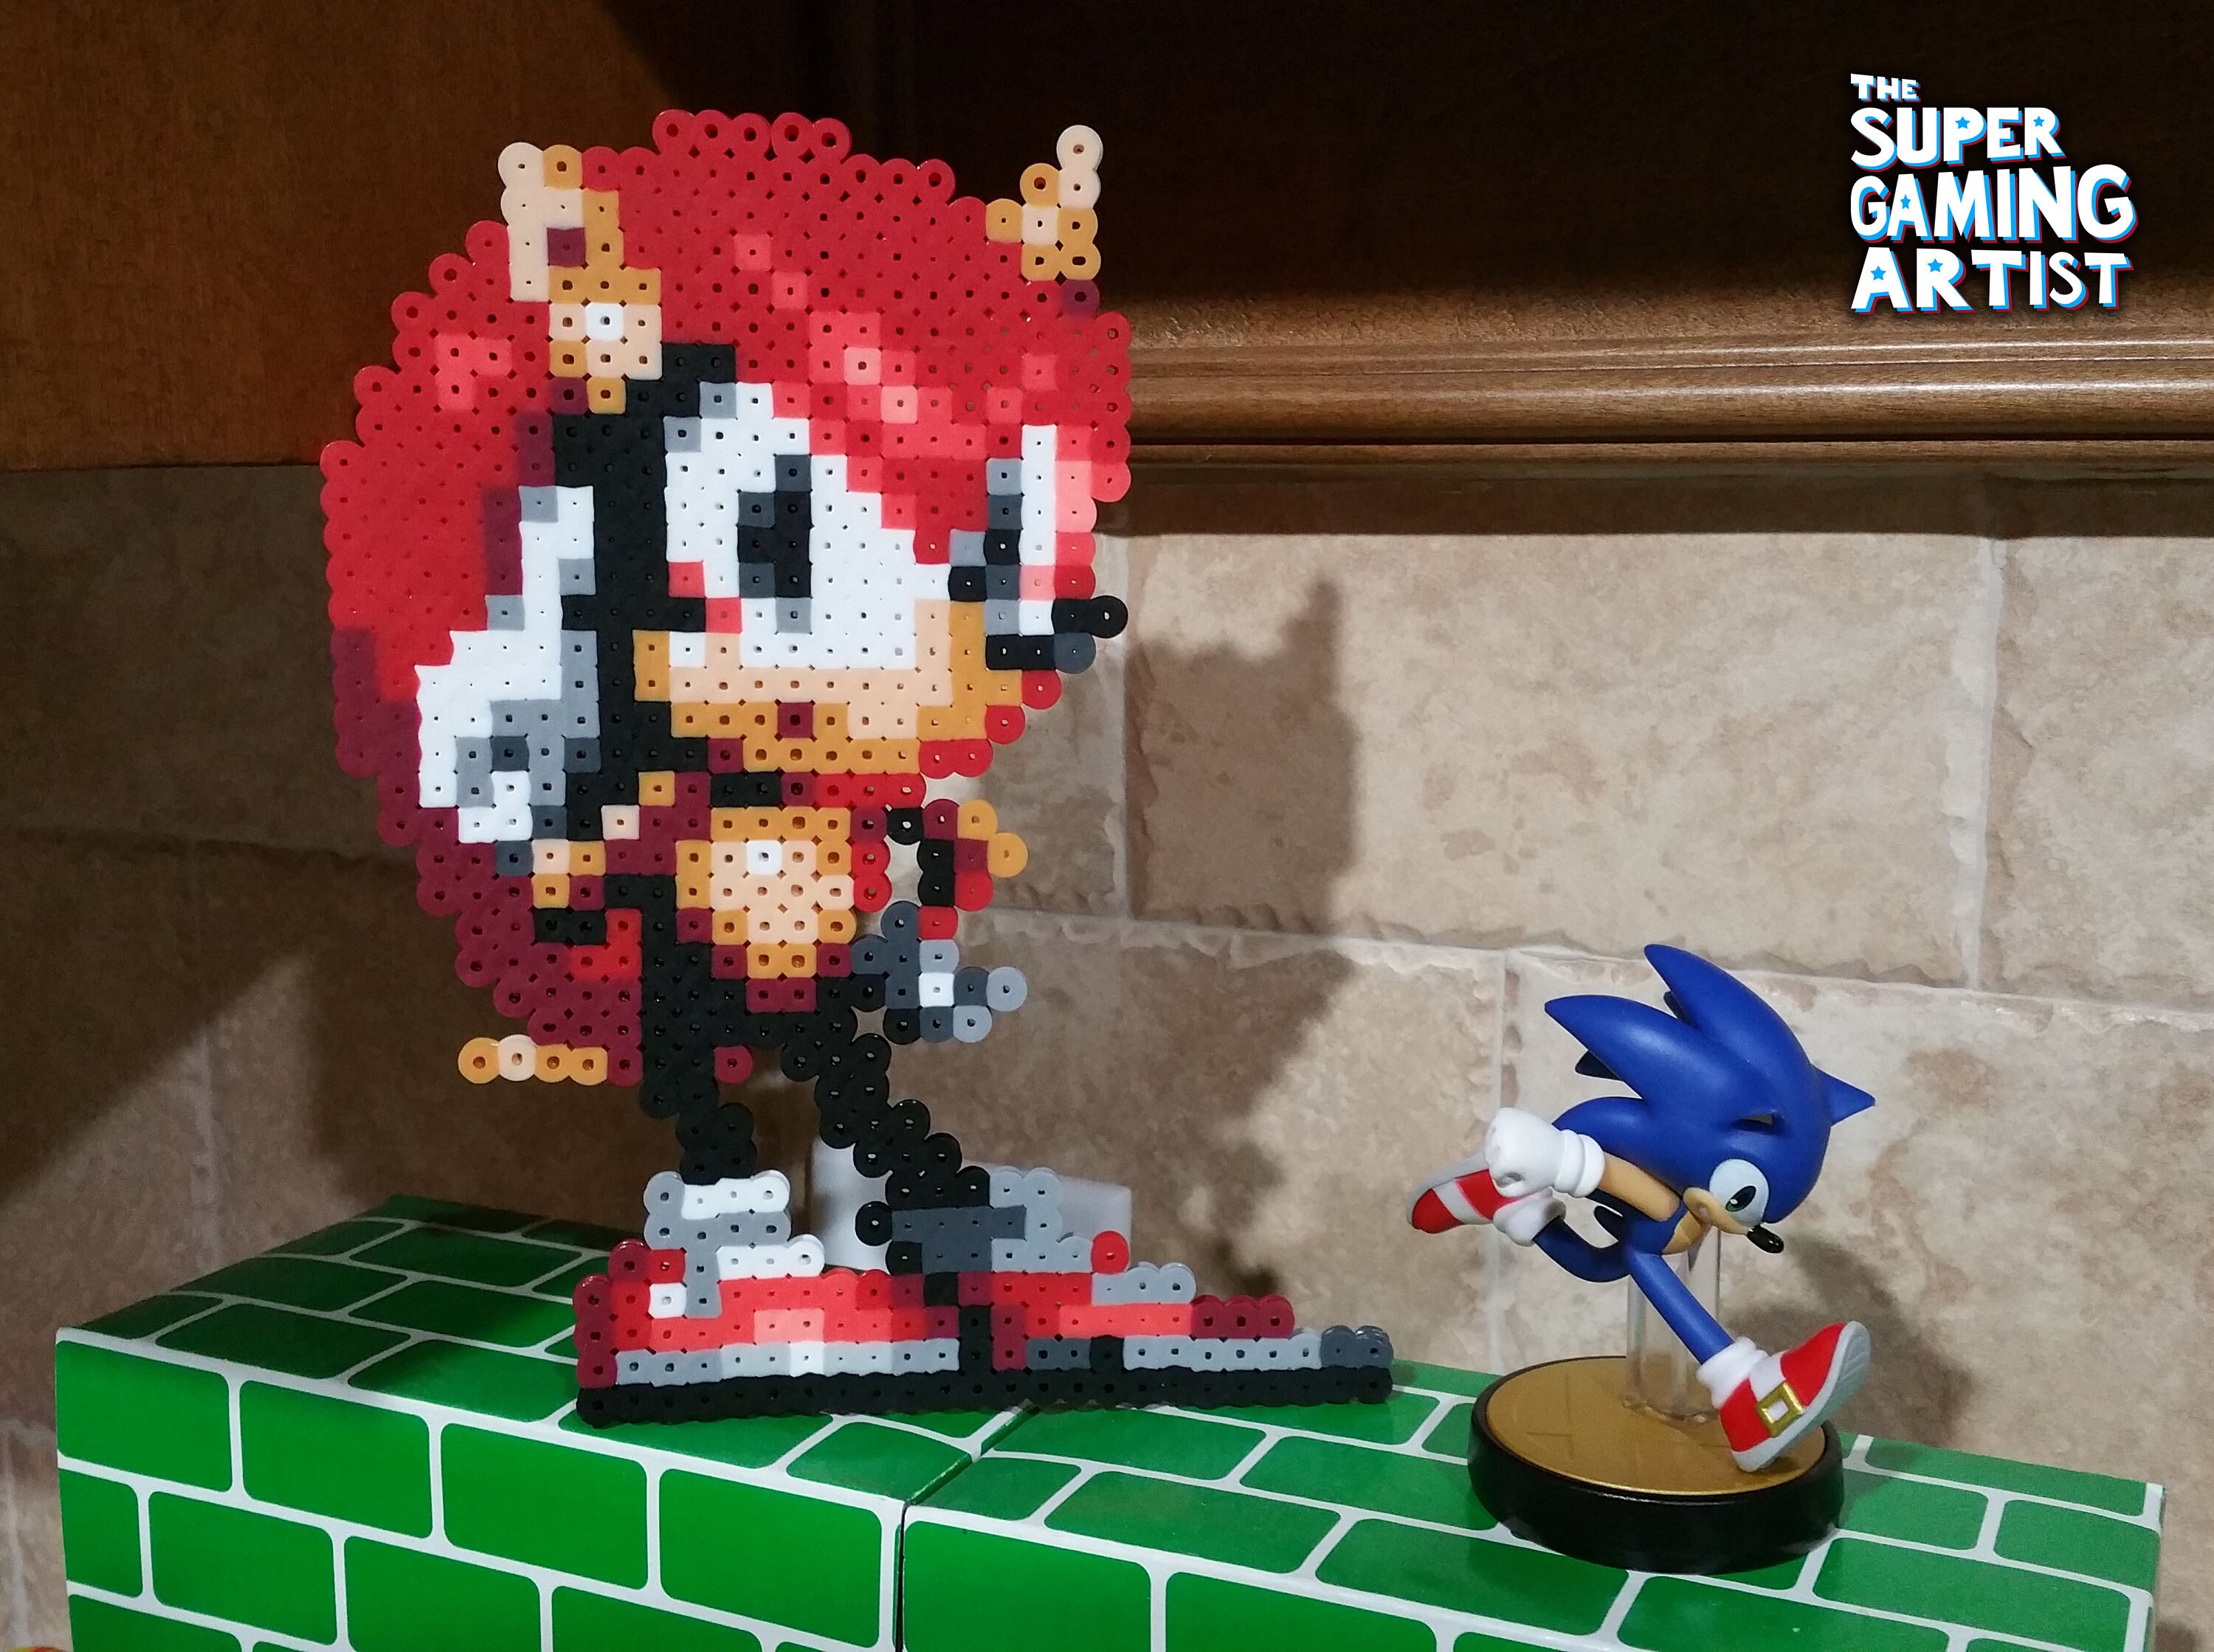 Knuckles The Echidna Knuckles' Chaotix Sonic CD Metal Sonic Sprite